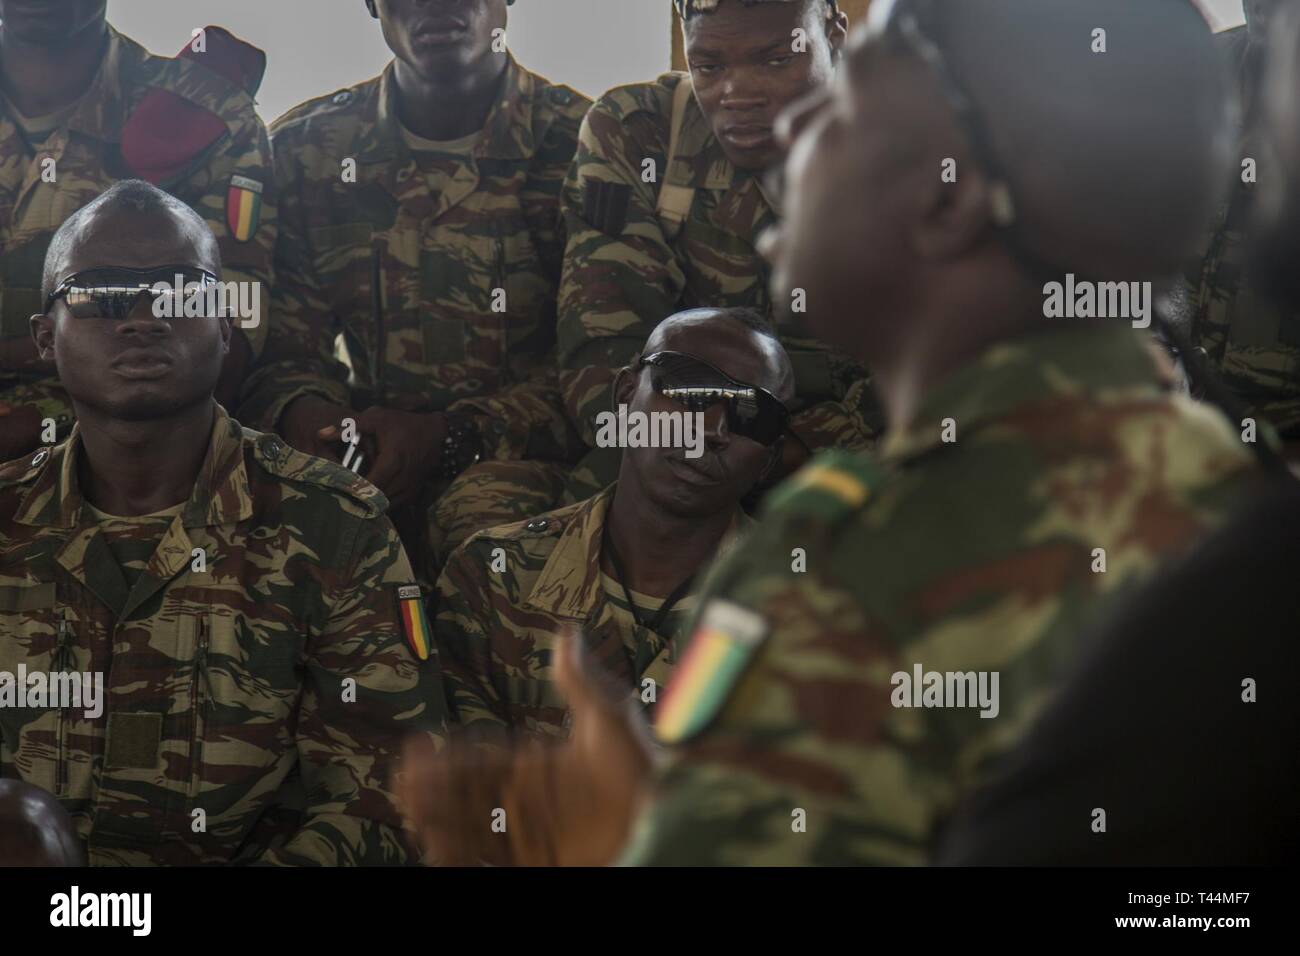 A Guinean Officer gives feedback on a Sensitive Site Exploitation (SSE) class at base camp Loumbila, Burkina Faso, Feb 20, 2019. Experts from Burkinabe law enforcement took the lead  on training multinational soldiers during the exercise. Stock Photo